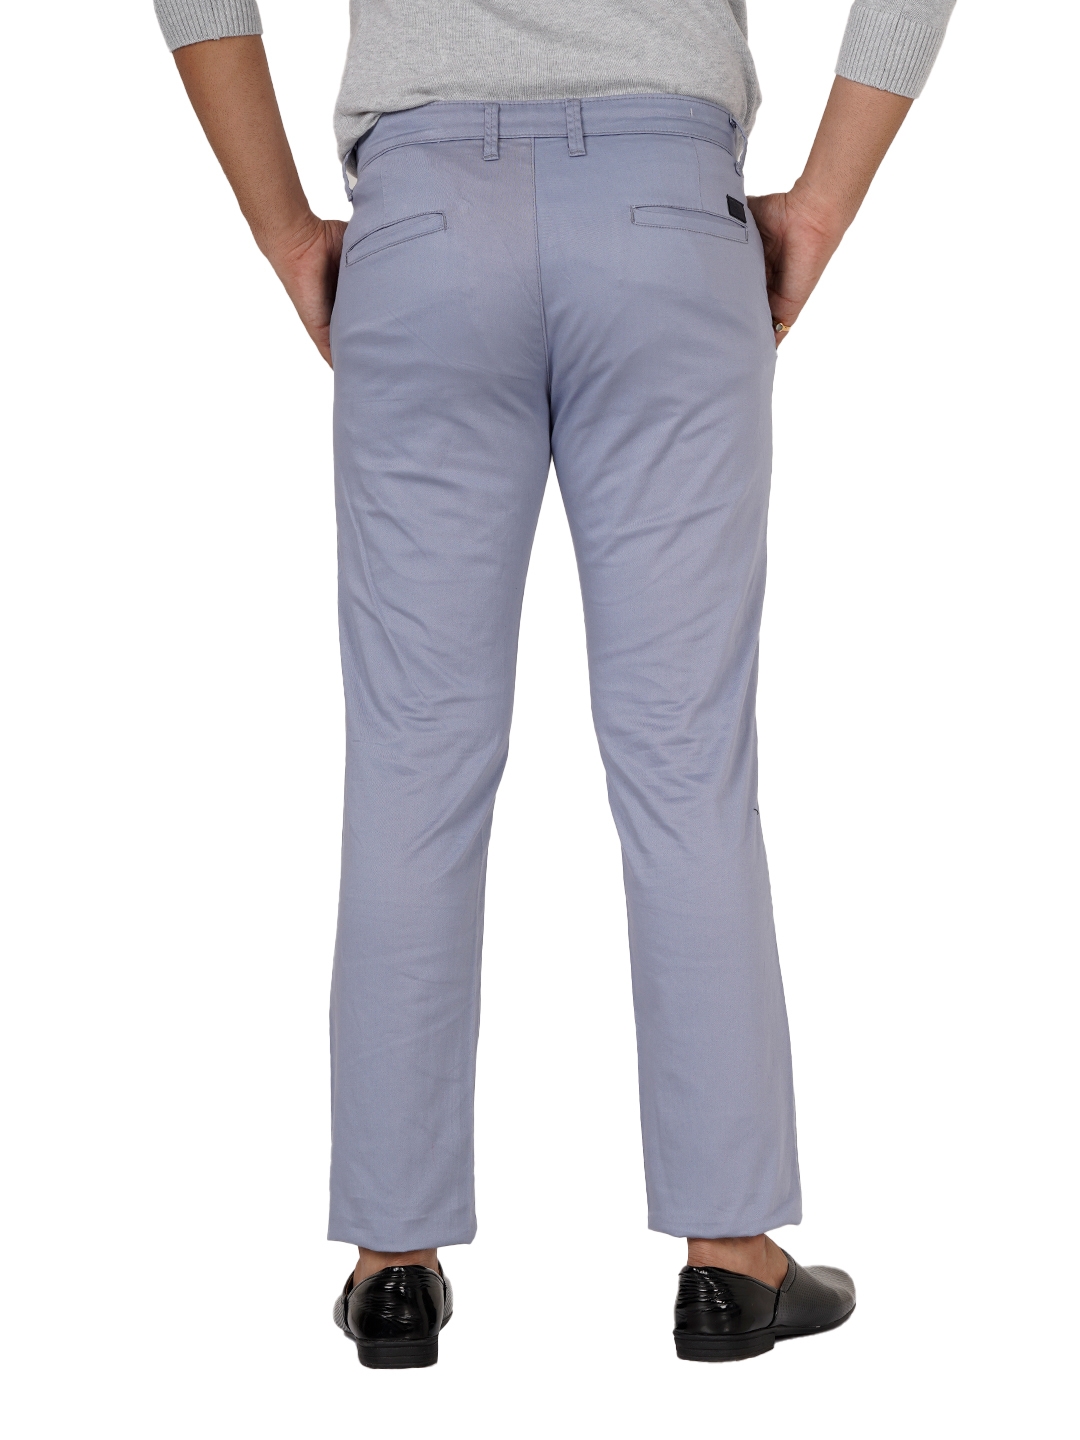 D'cot by Donear | D'cot by Donear Men's Blue Cotton Trousers 3